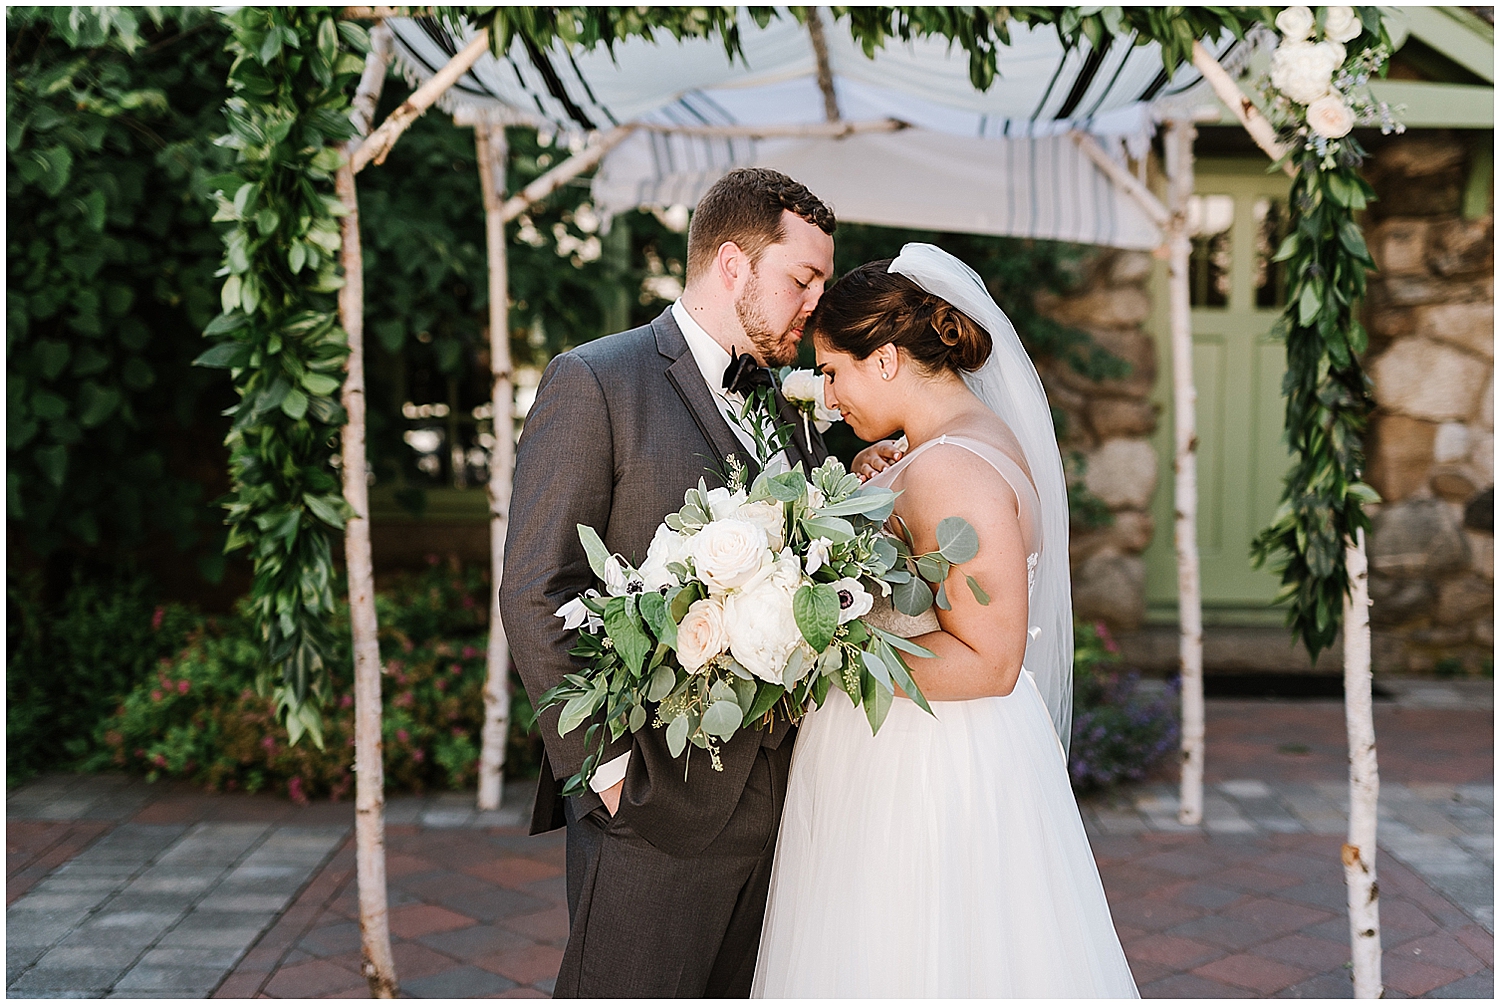 Emotional & Intimate Jewish Wedding at Willowdale Estate in Topsfield, MA by Boston Wedding Photographer Annmarie Swift